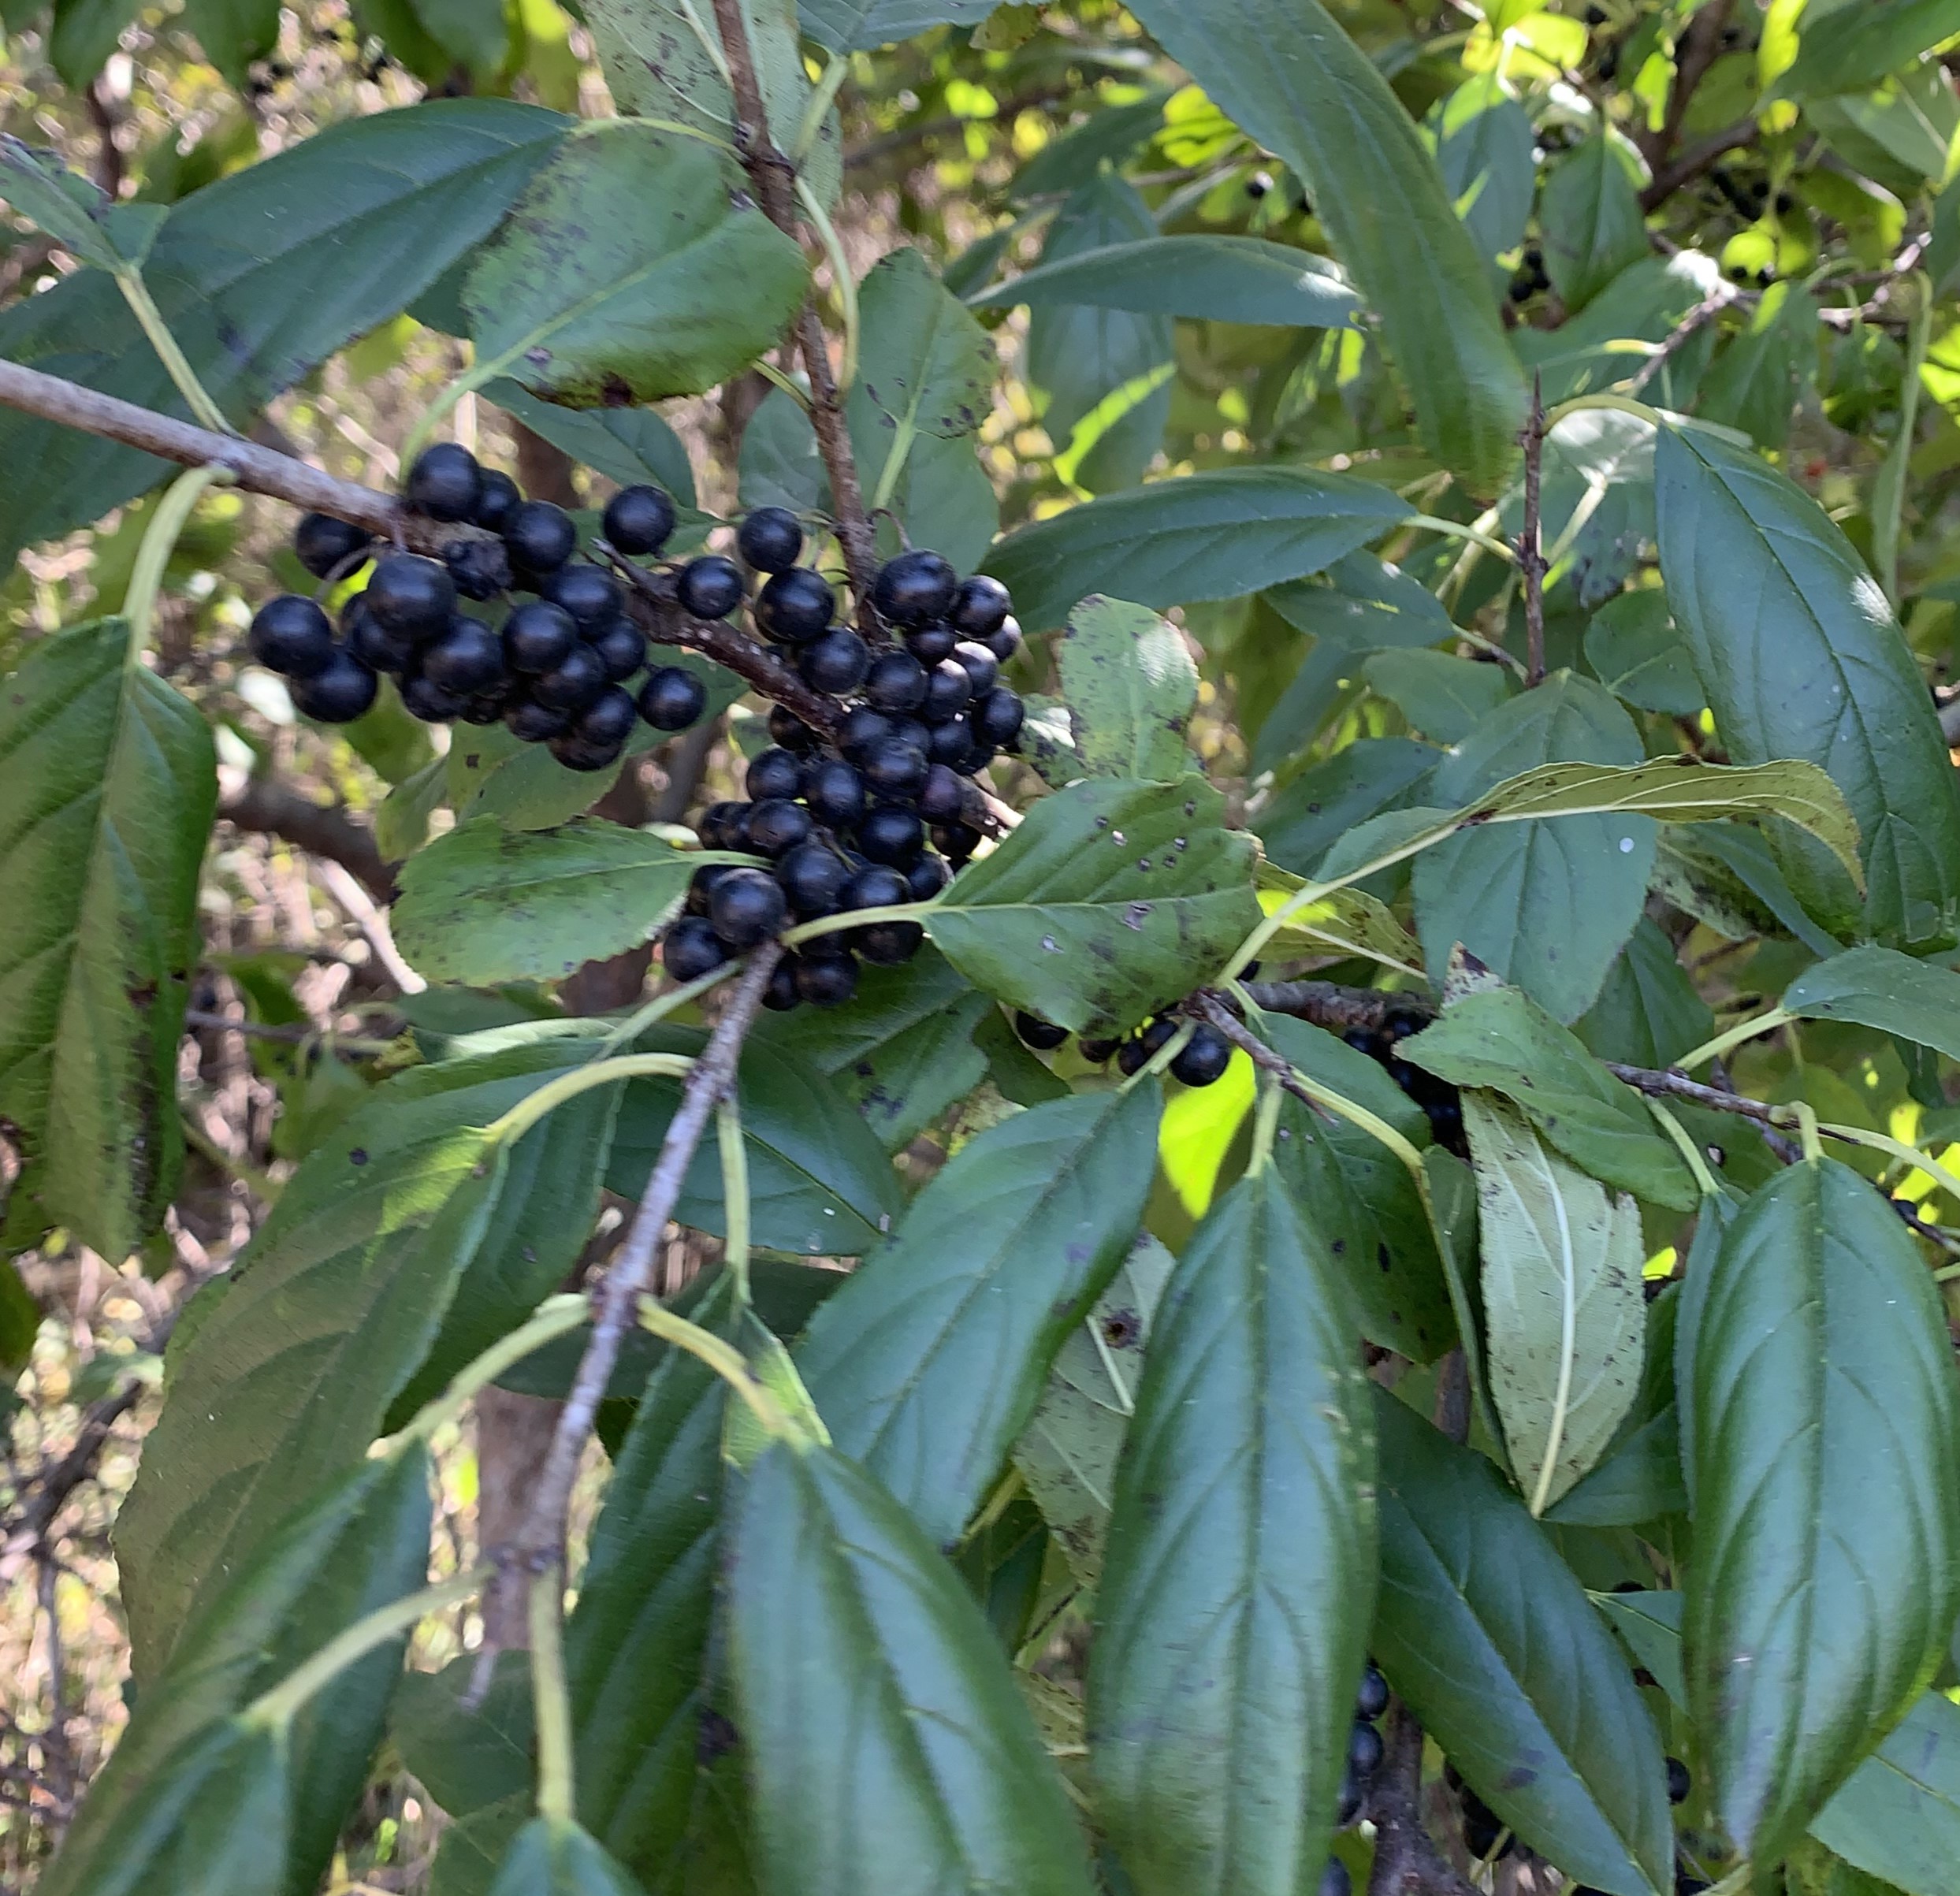 Dense cluster of black berries and long, shiny green leaves of Common Buckthorn thrive at the edge of the soybean field. The overwintering birds will eat, and the aphids will live to challenge next season’s beans.